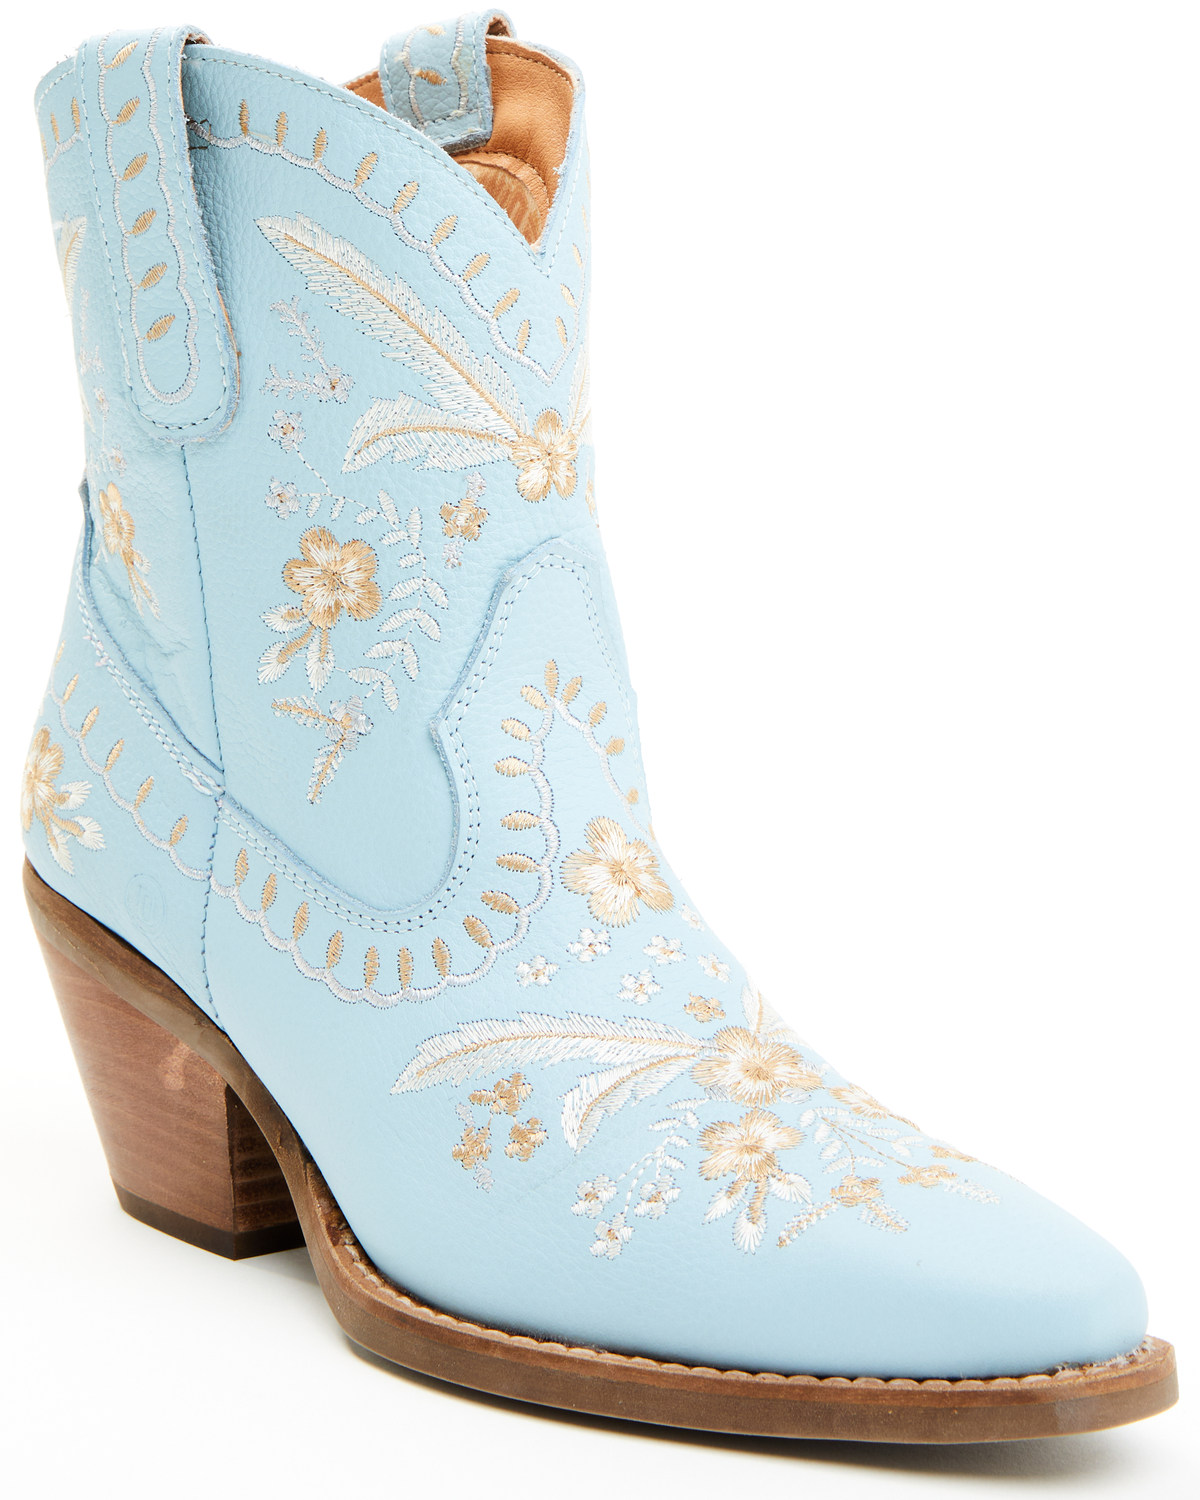 Dingo Women's Primrose Embroidered Leather Western Fashion Booties - Snip Toe